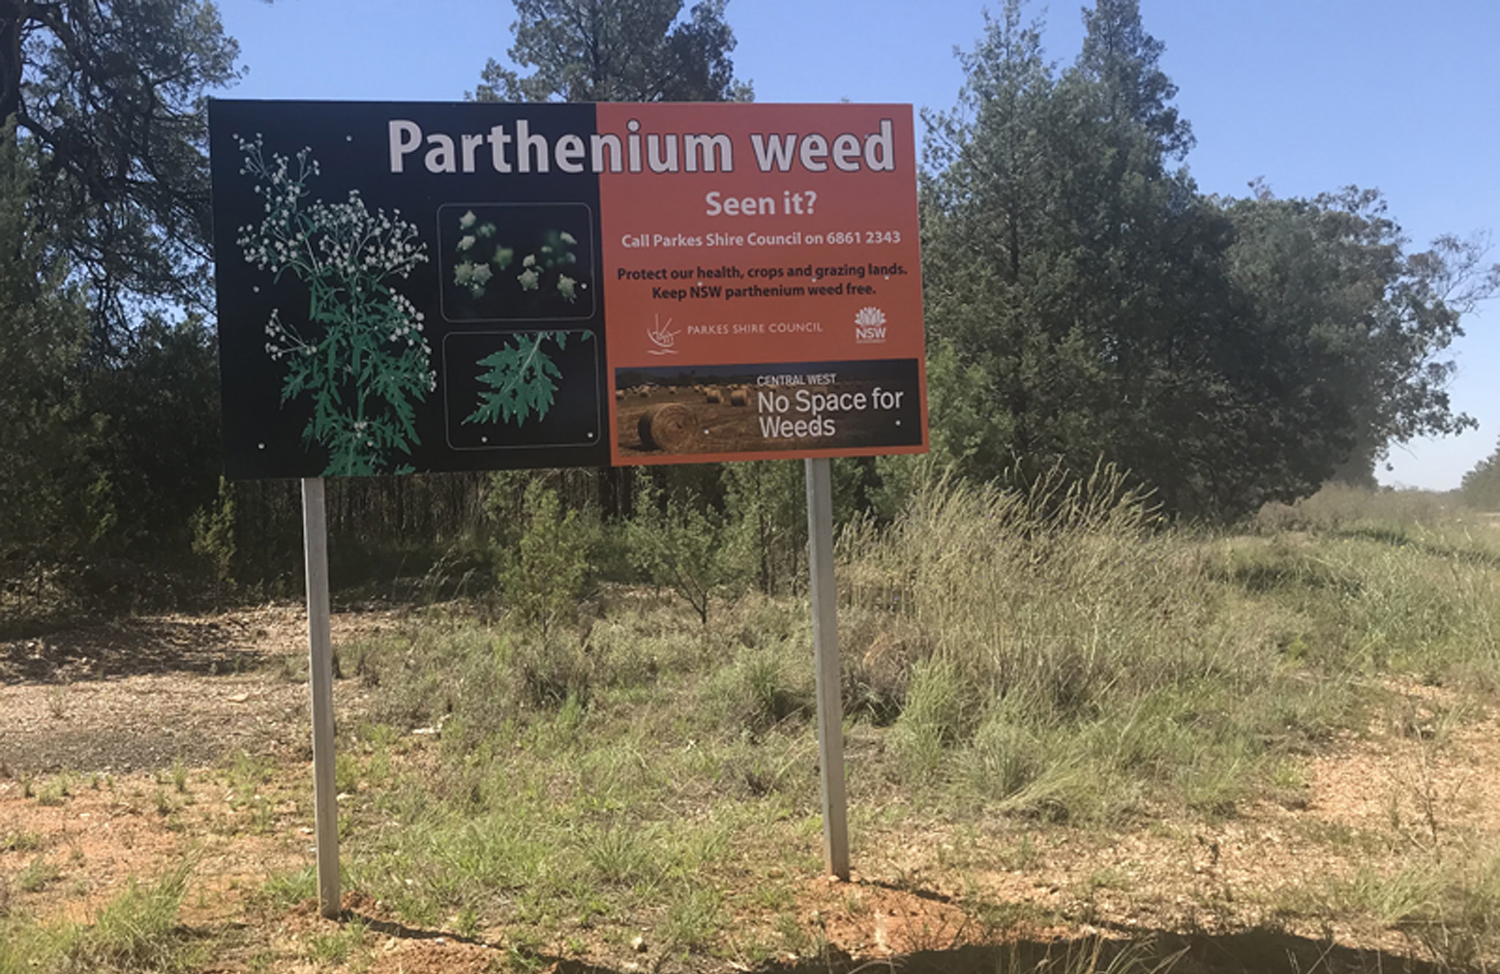 Parthenium weed sign in Parkes NSW